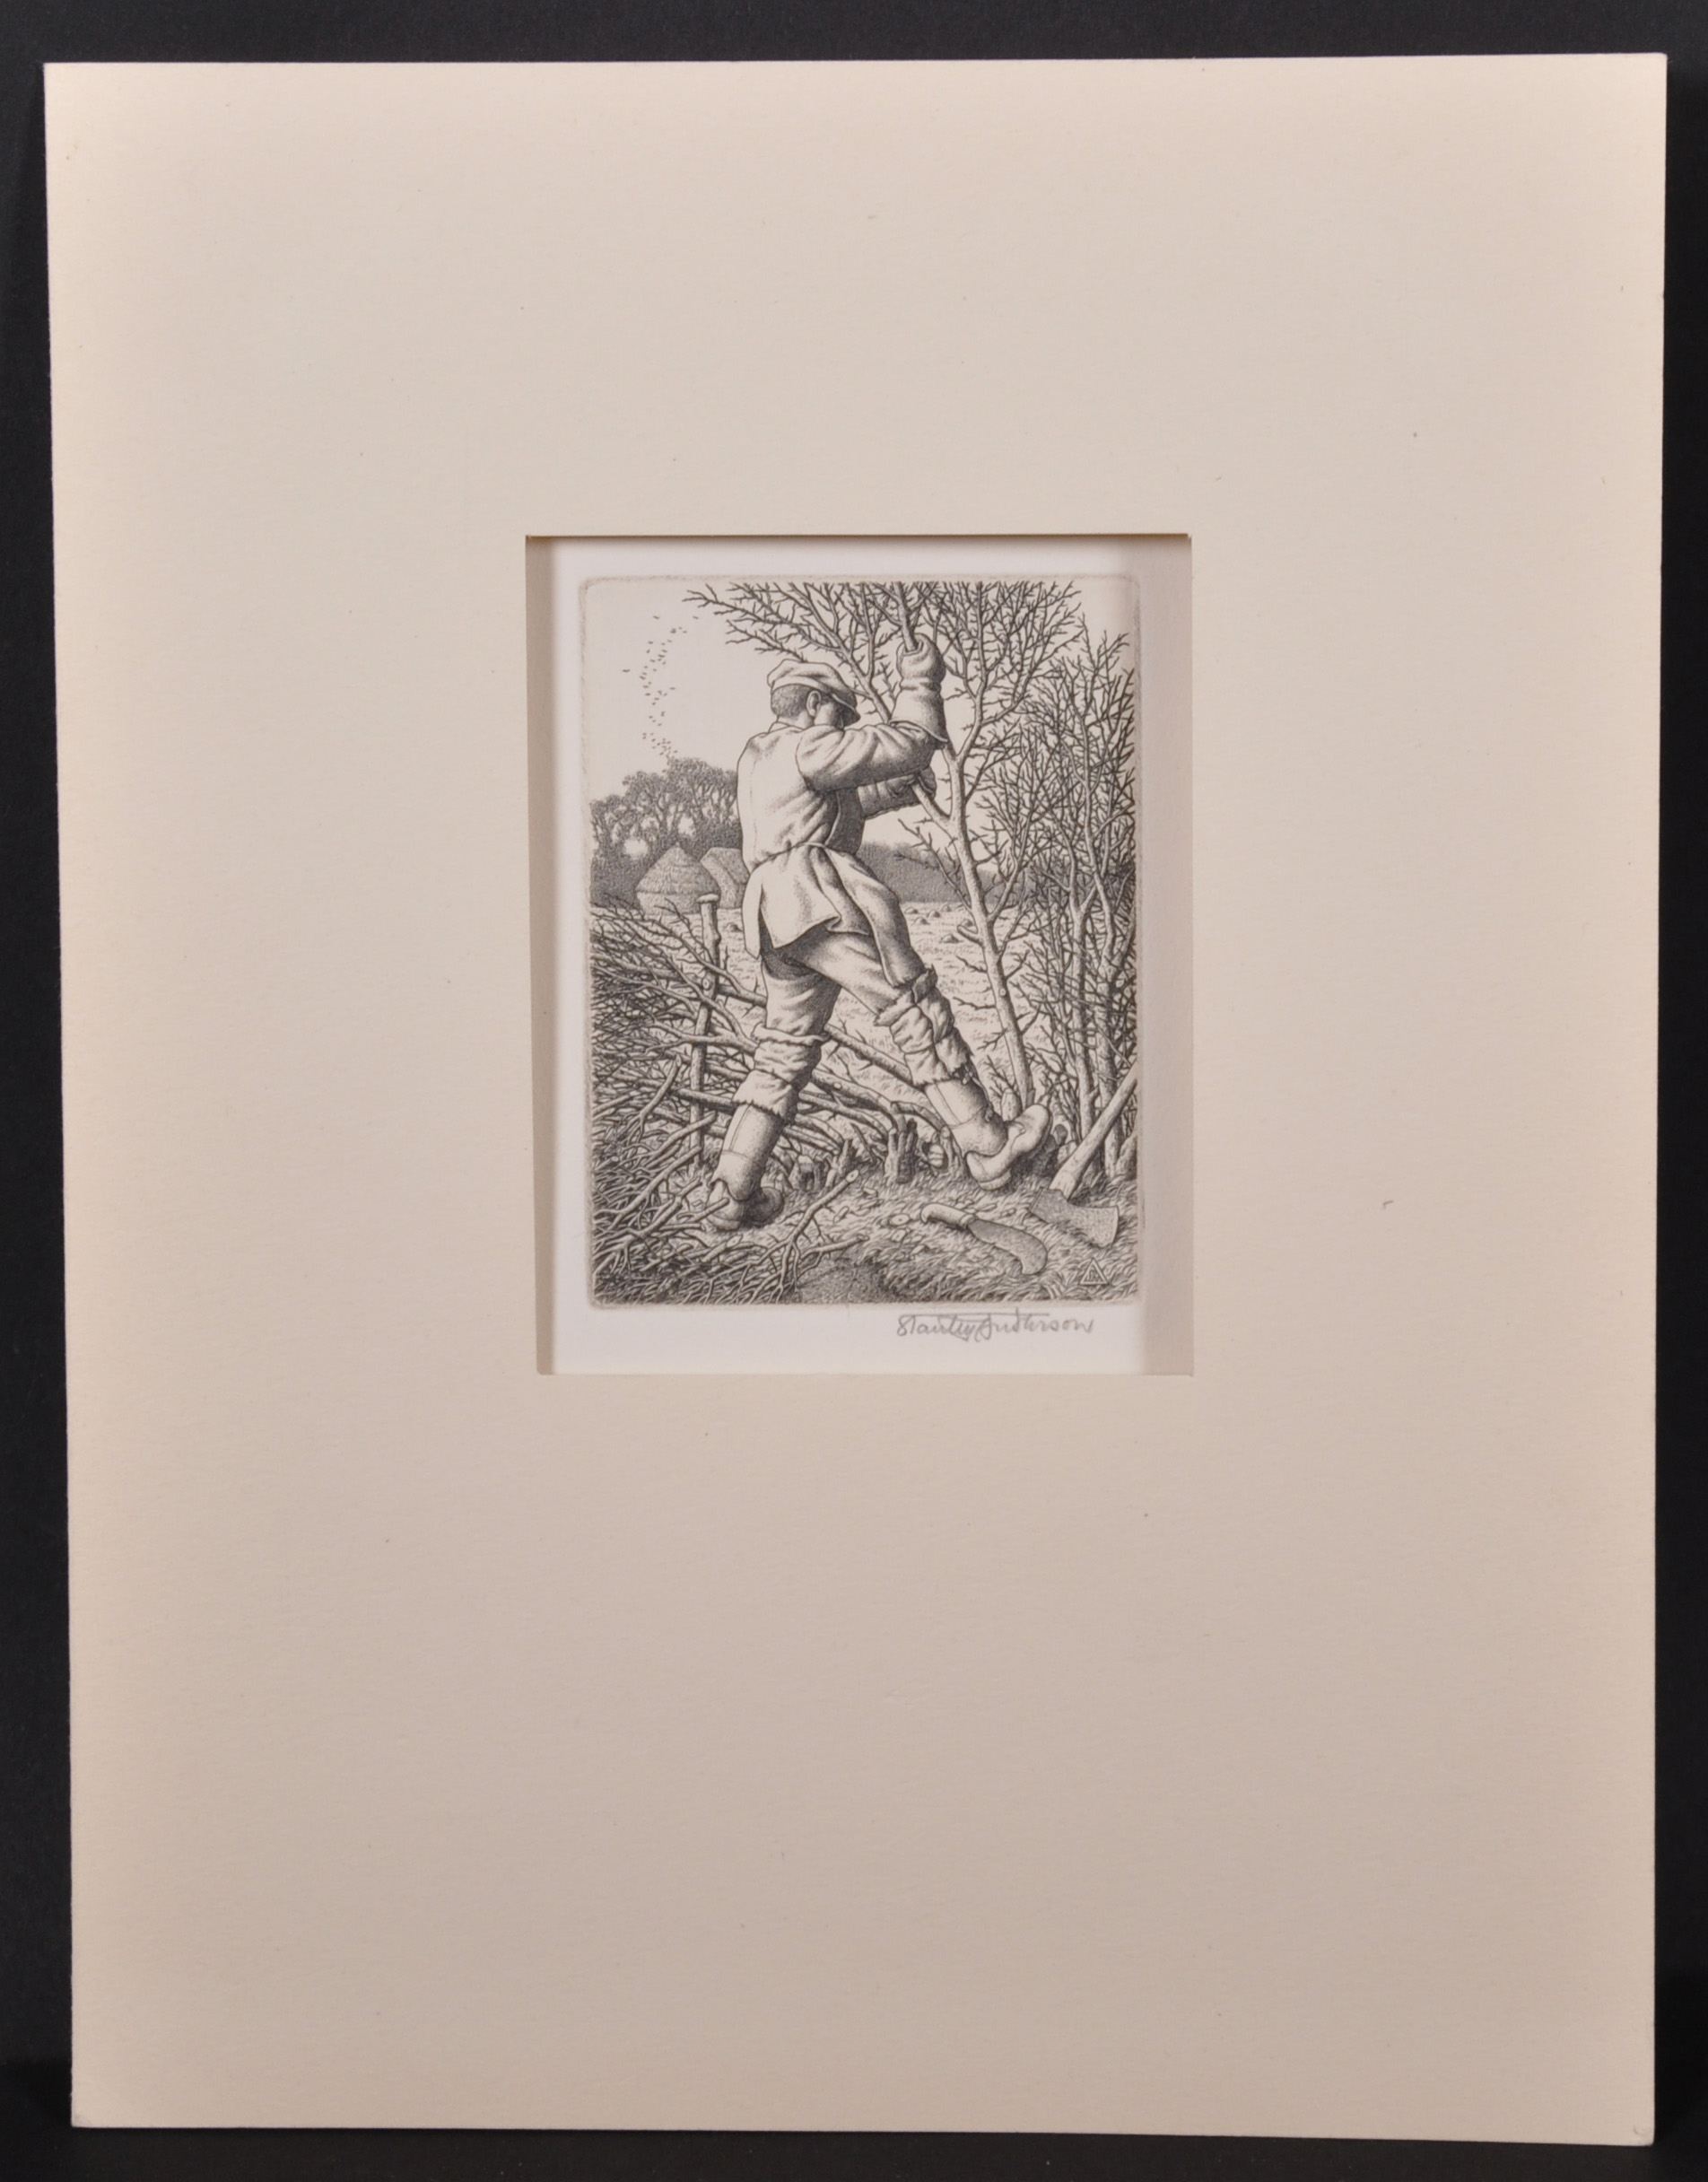 Stanley Anderson (1884-1966) British. “Hedge-laying”, Etching, Signed in Pencil, Mounted, - Image 4 of 4